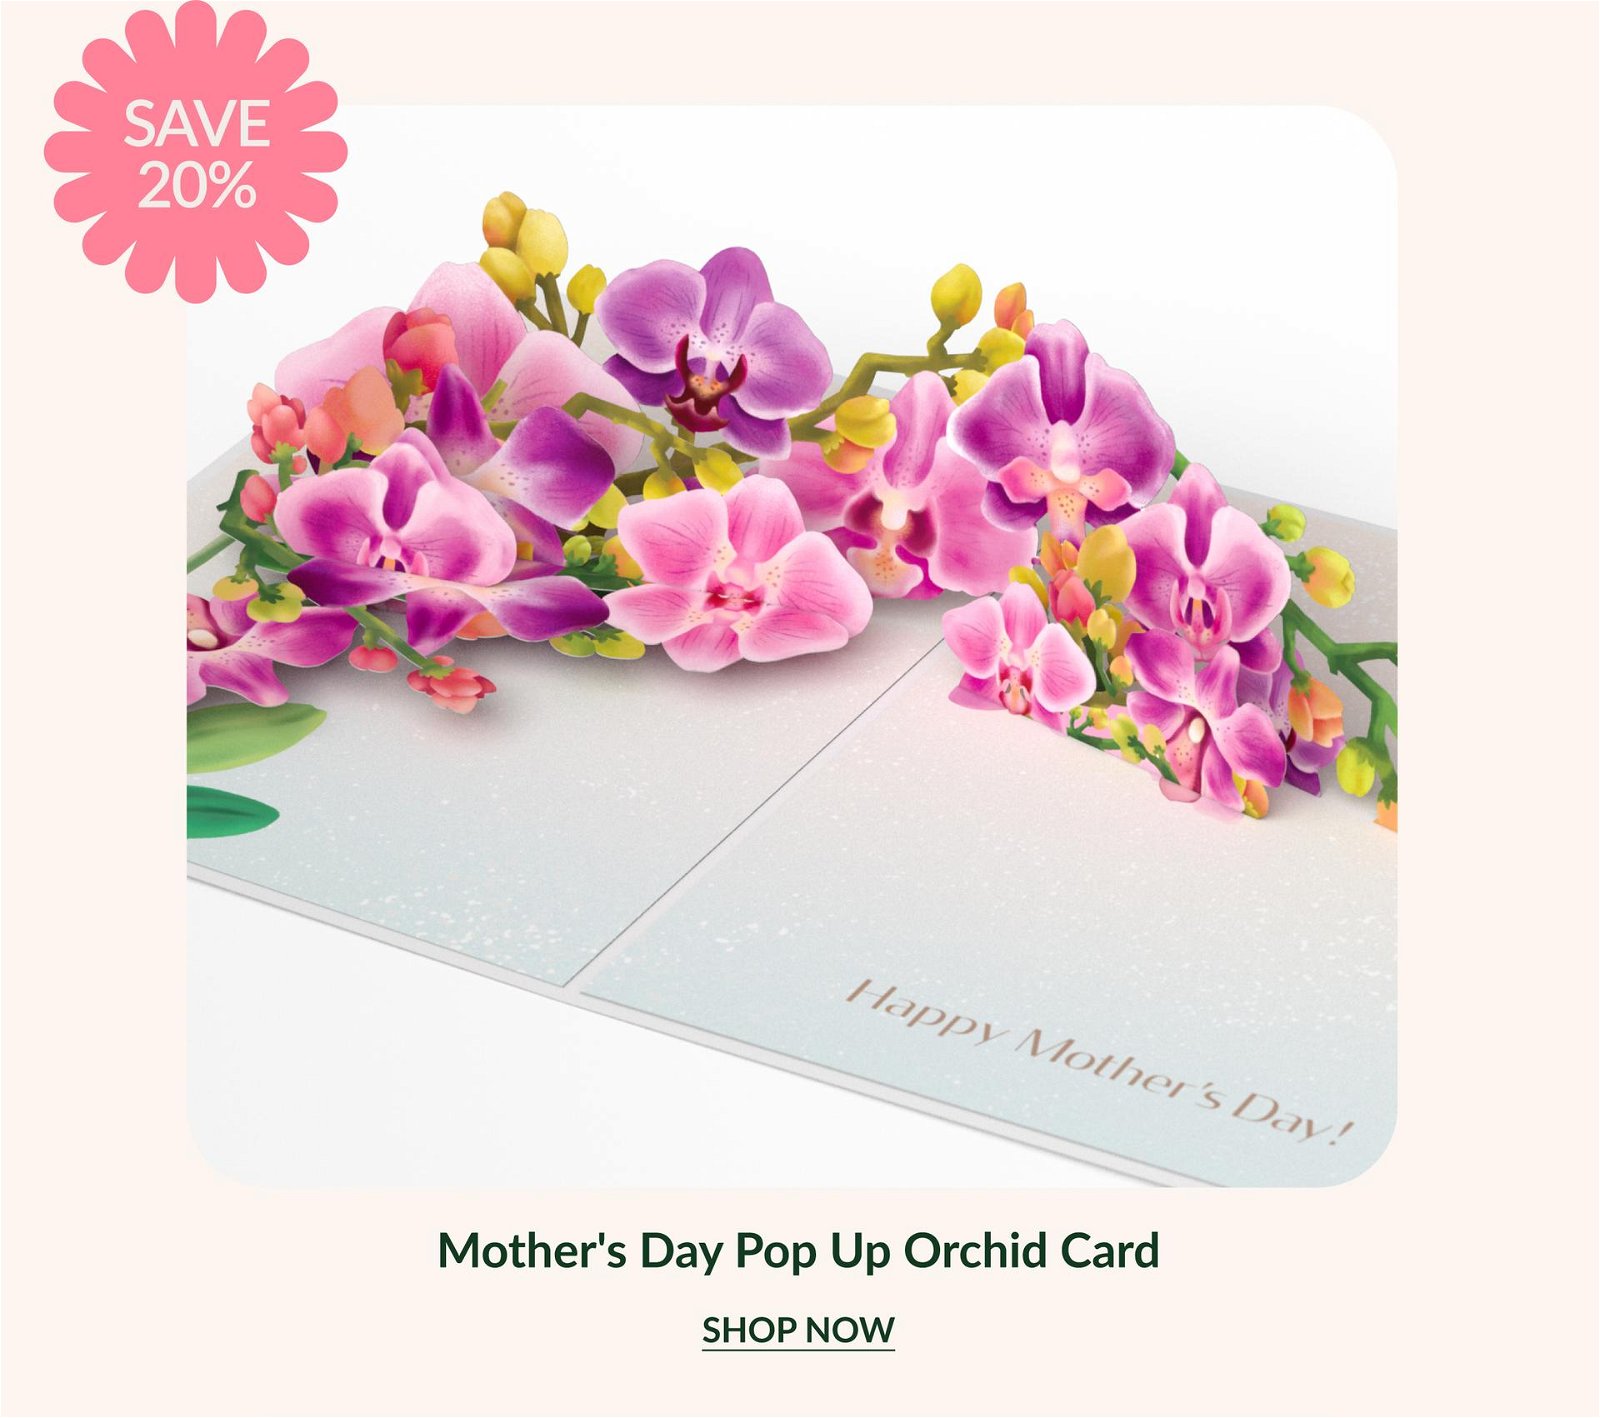 Mother's Day Orchid Pop-Up Card